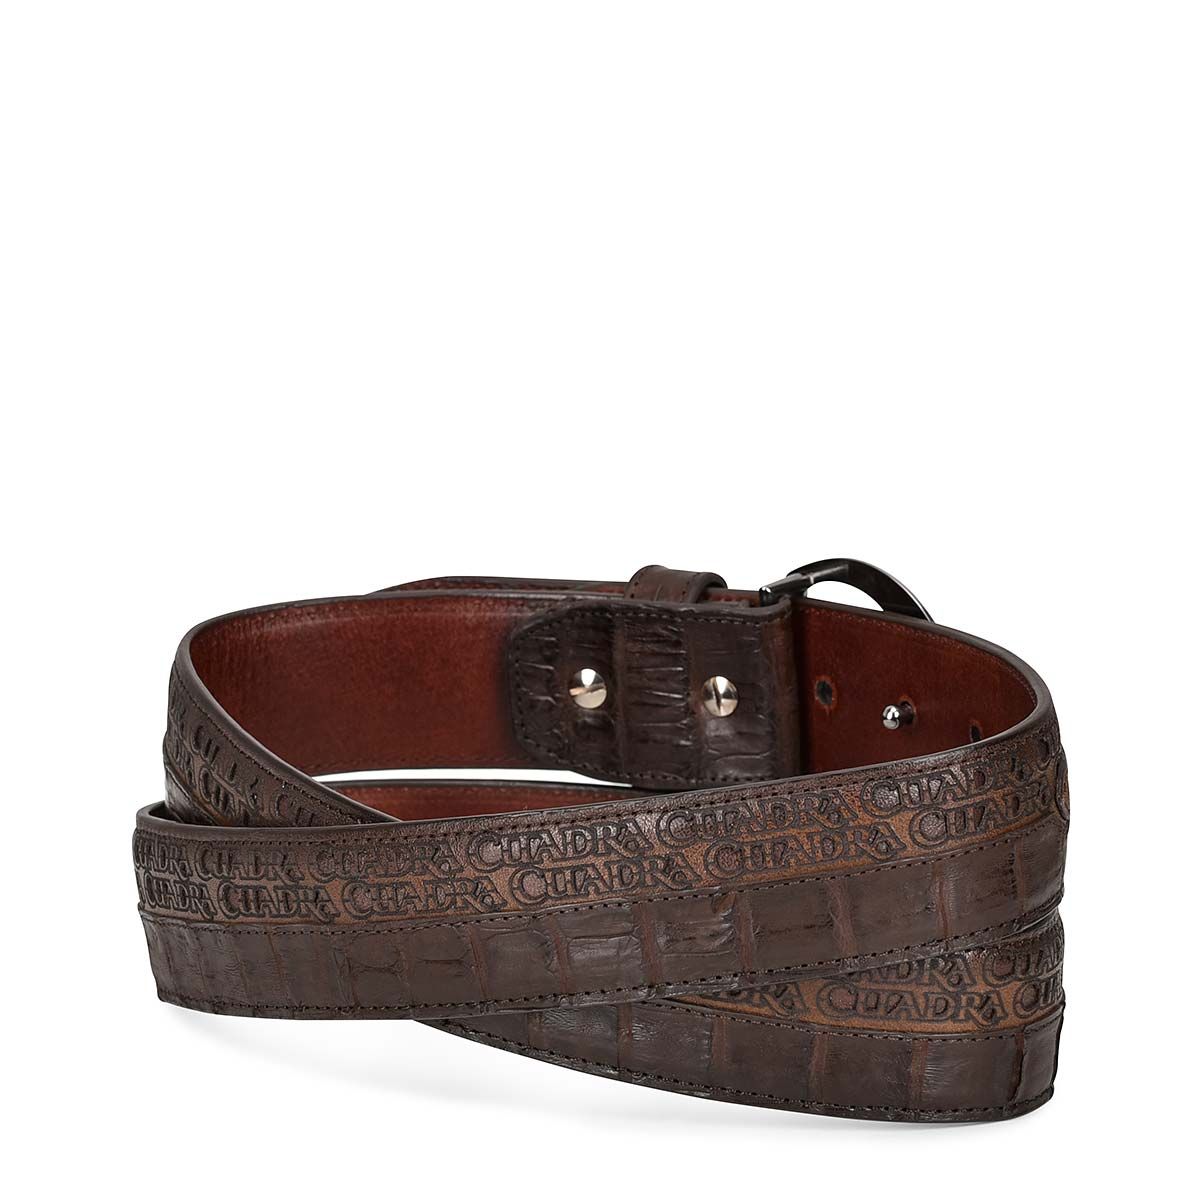 Complete with a 38 mm Cuadra monogram buckle and luxurious bovine leather lining, this belt is the epitome of style and craftsmanshi